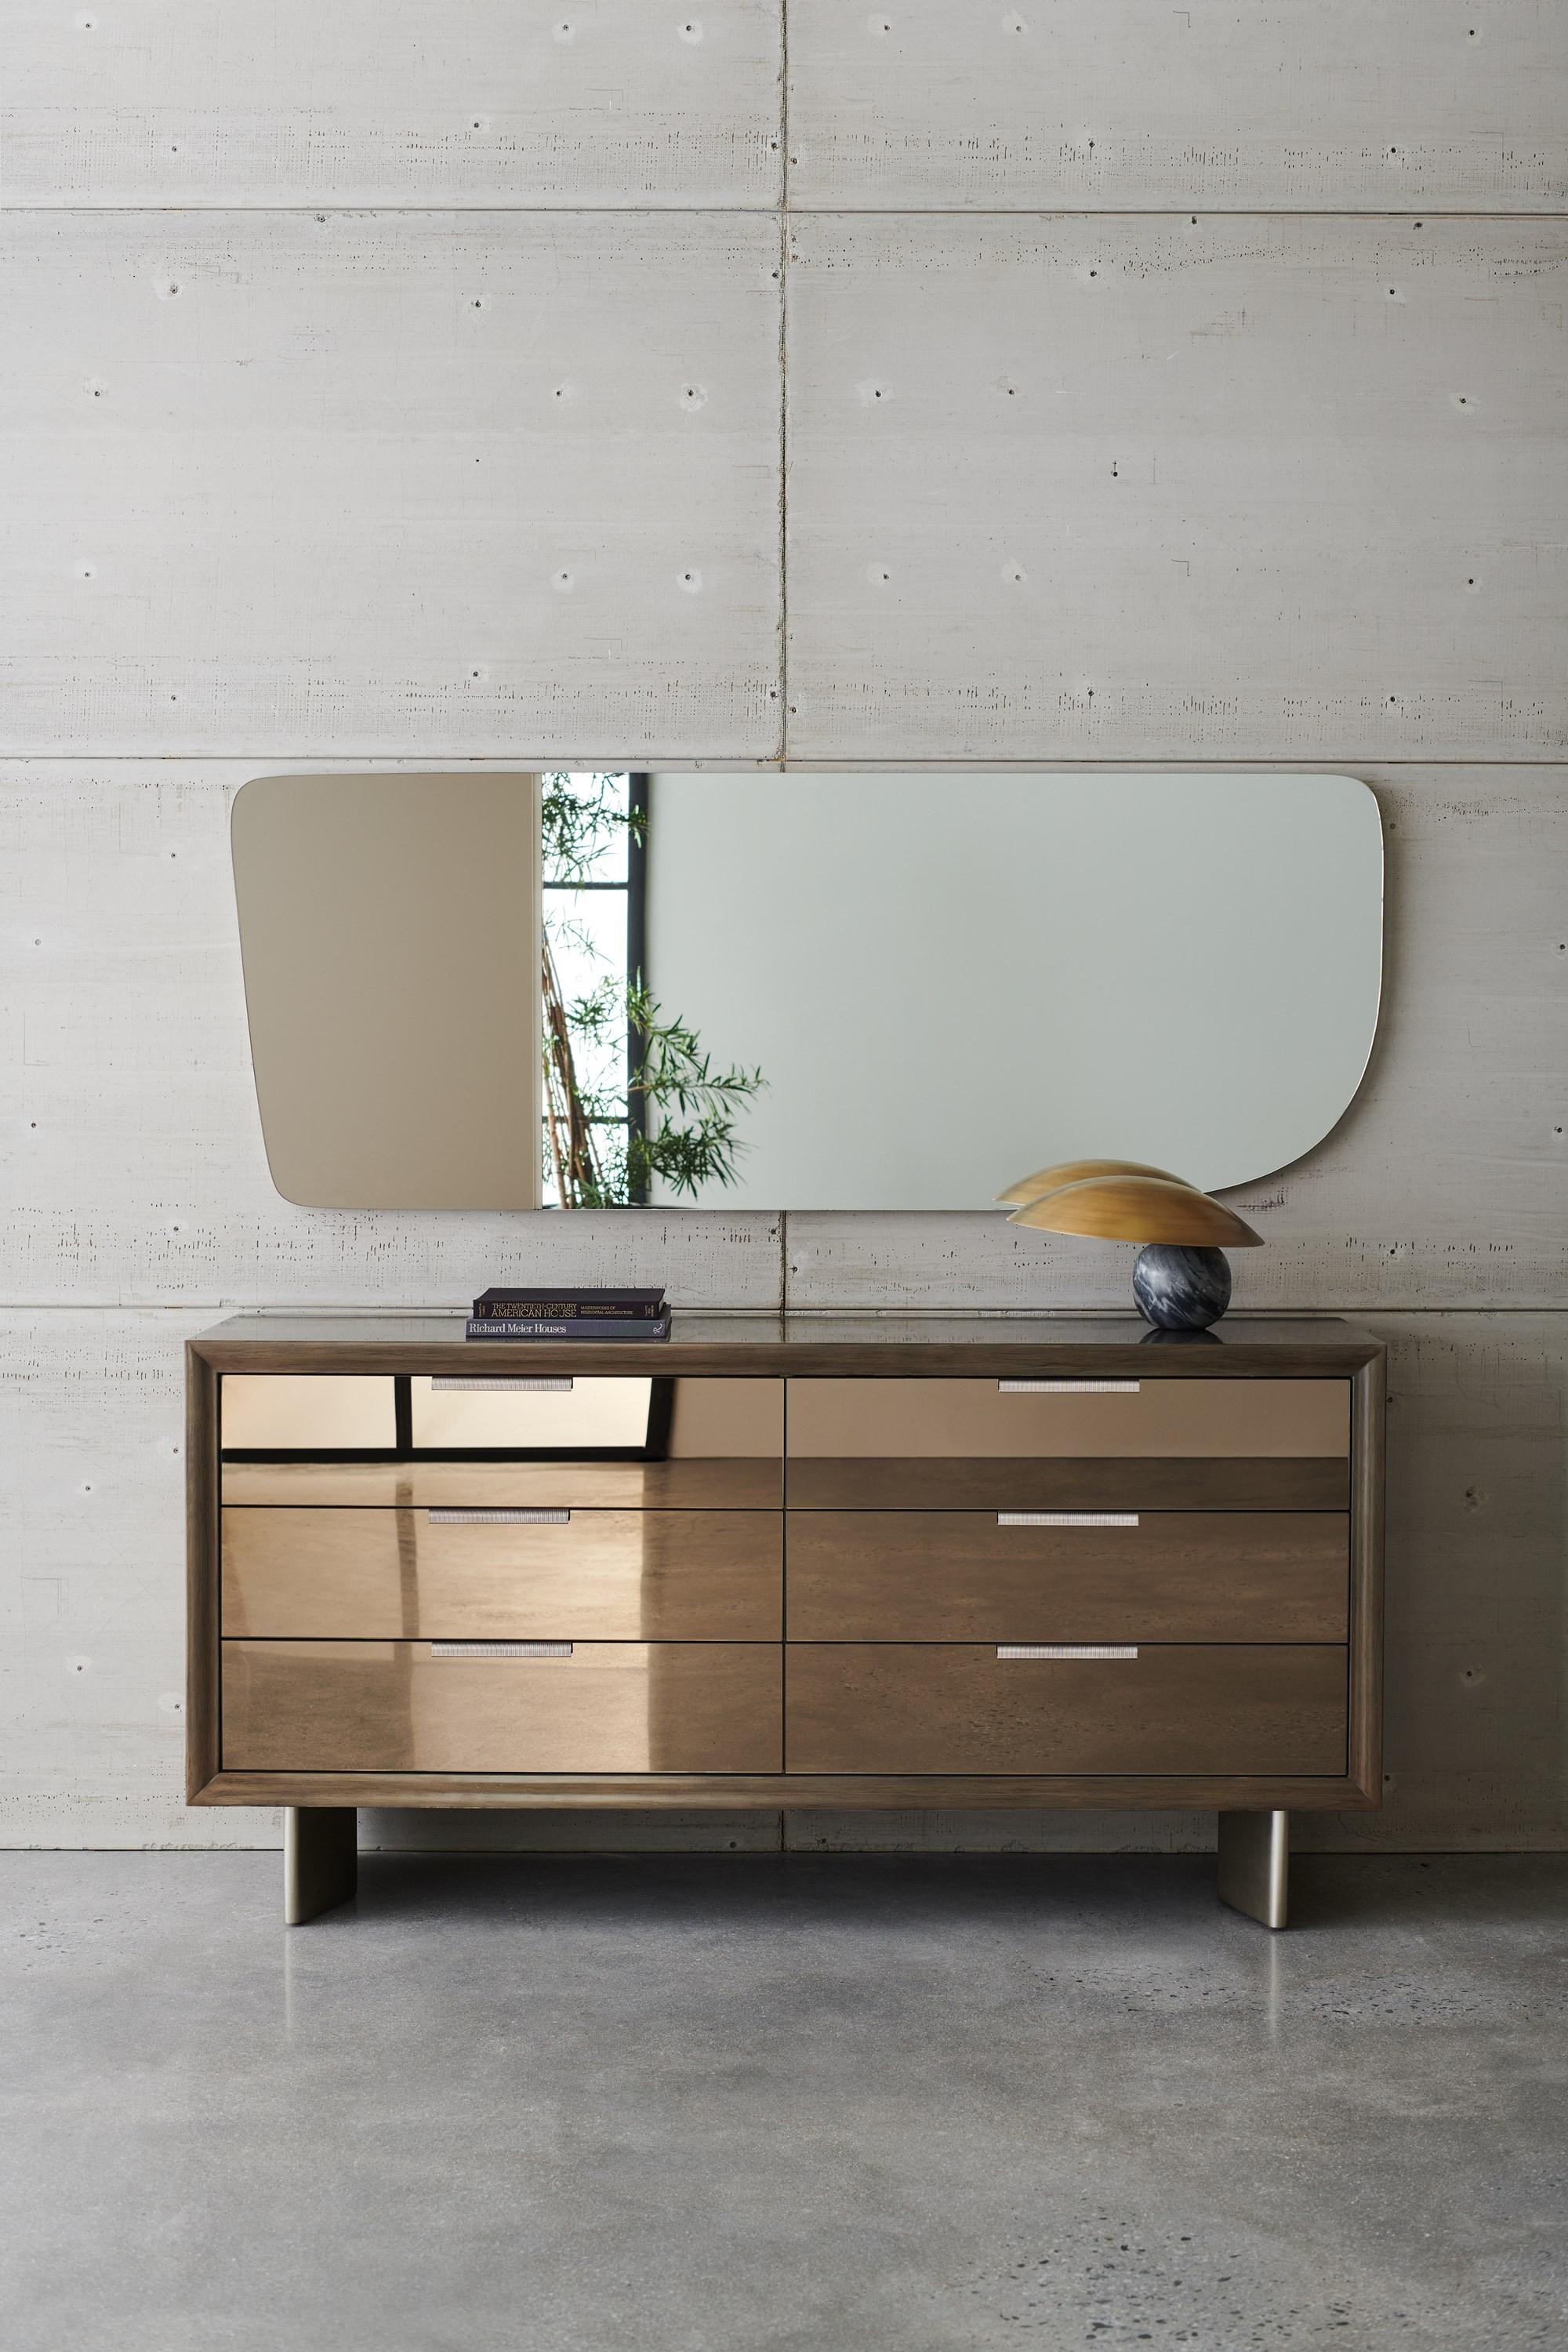 

    
Sepia & Smoked Stainless Steel Paint Finish LA MODA DRESSER W/ Mirror by Caracole
